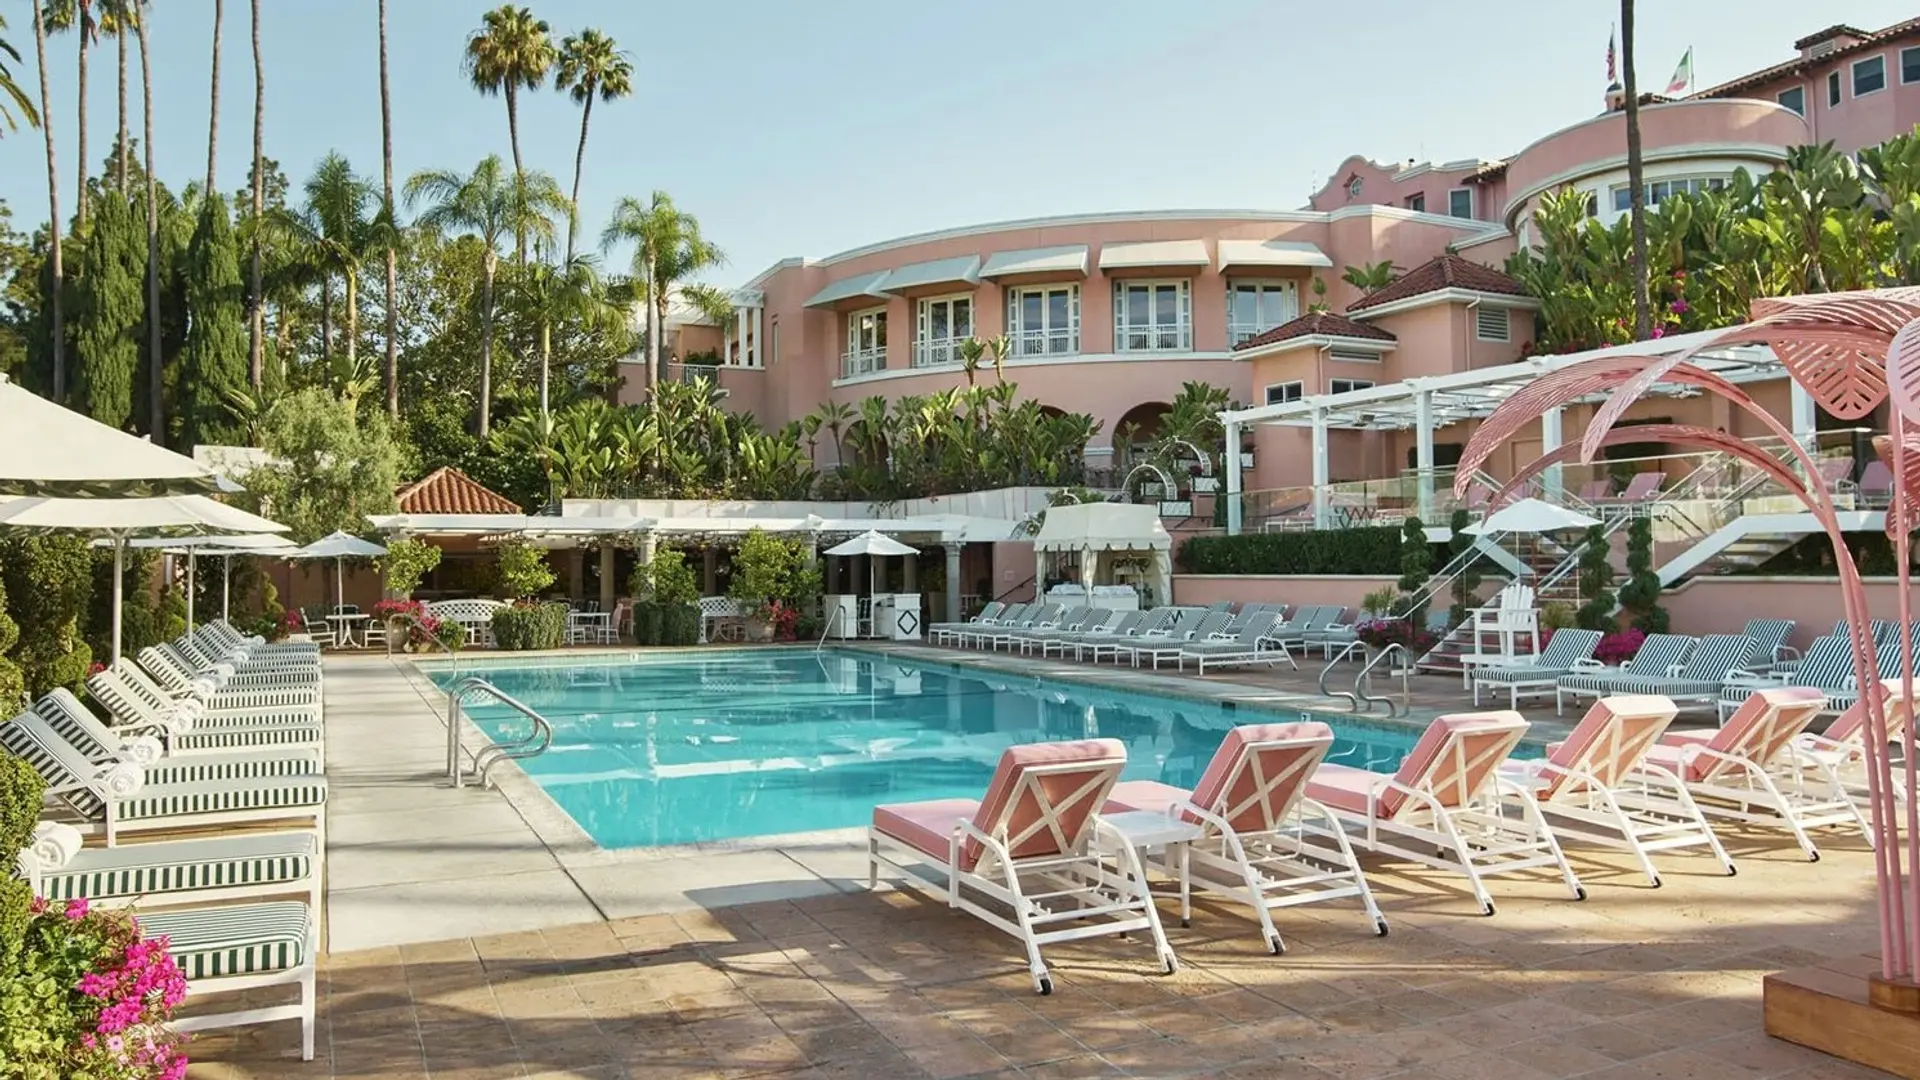 Hotel review Location' - The Beverly Hills Hotel - 2